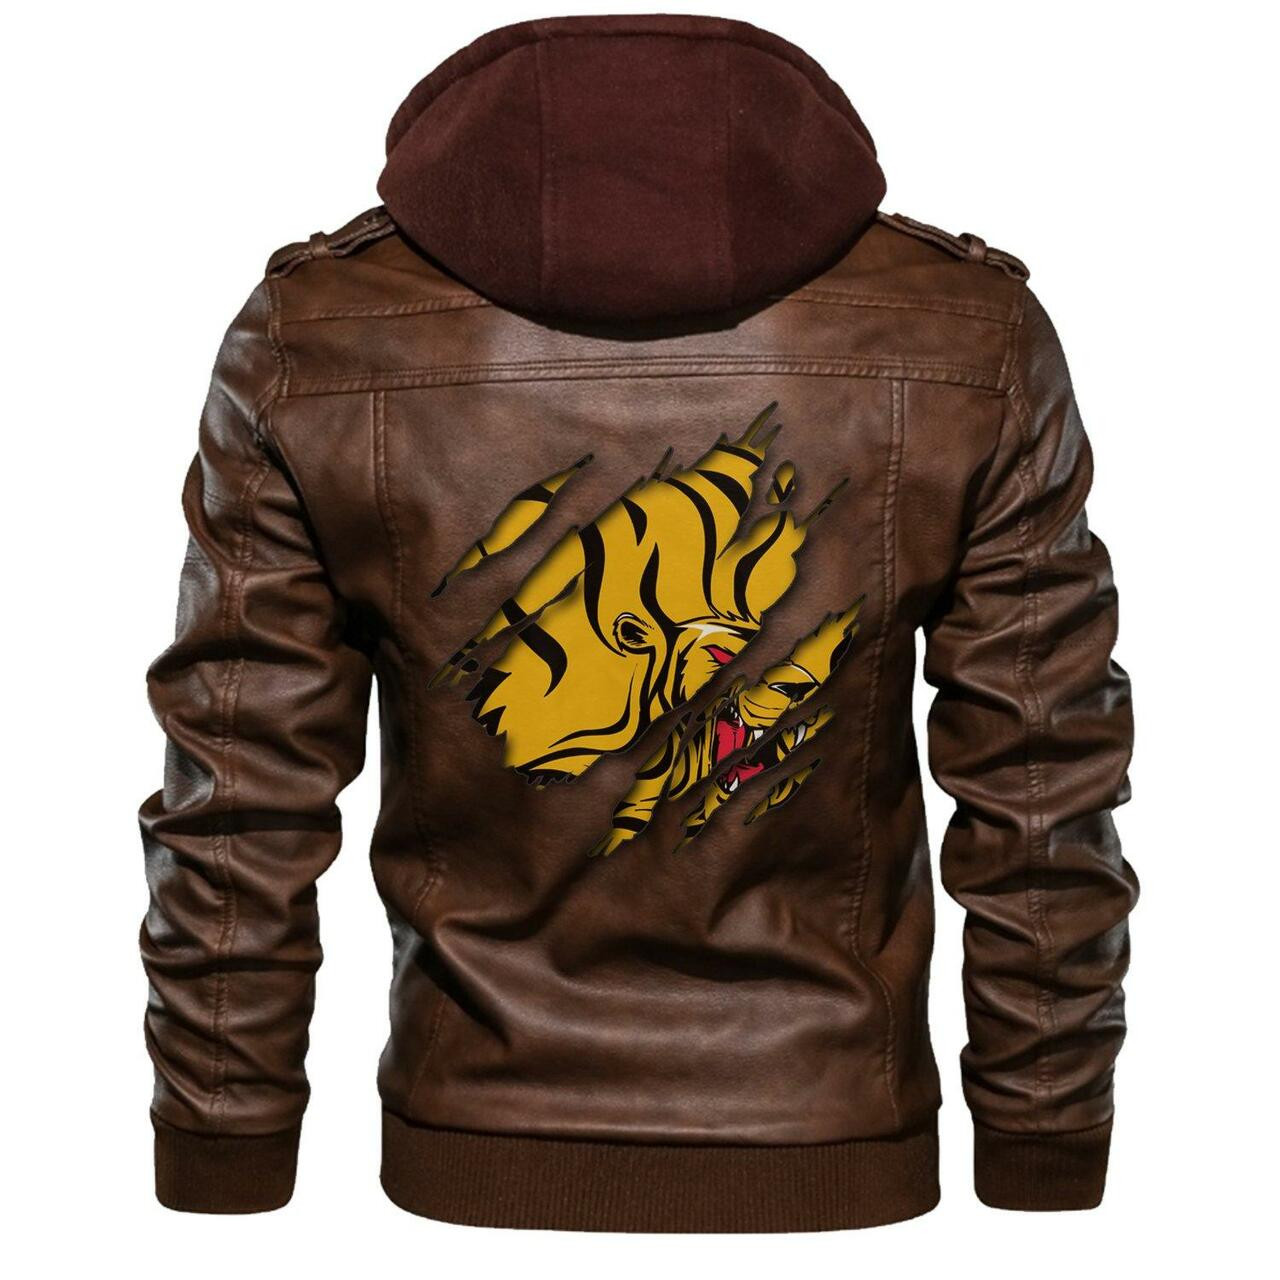 These Leather Jacket are popular options for Winter 441